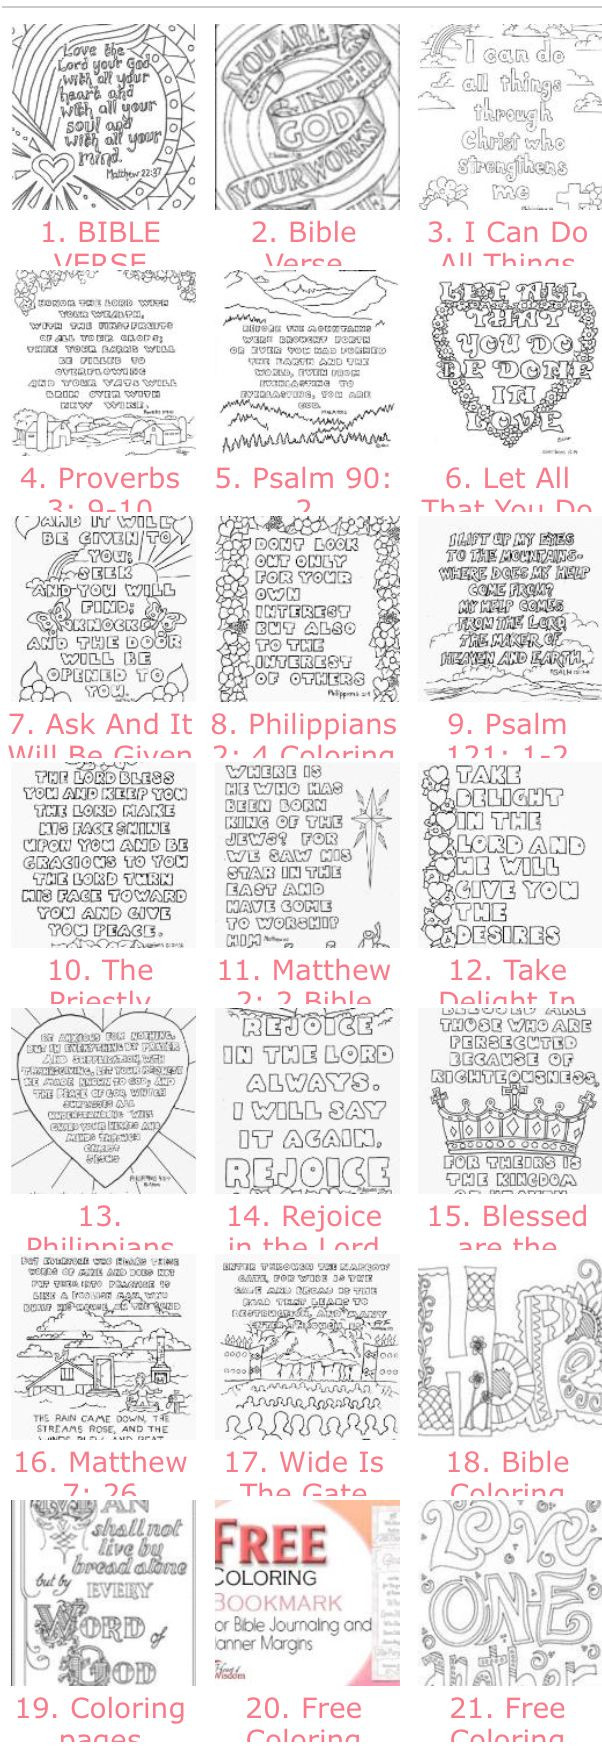 Bible Crafts For Adults
 Best 25 Bible crafts ideas on Pinterest